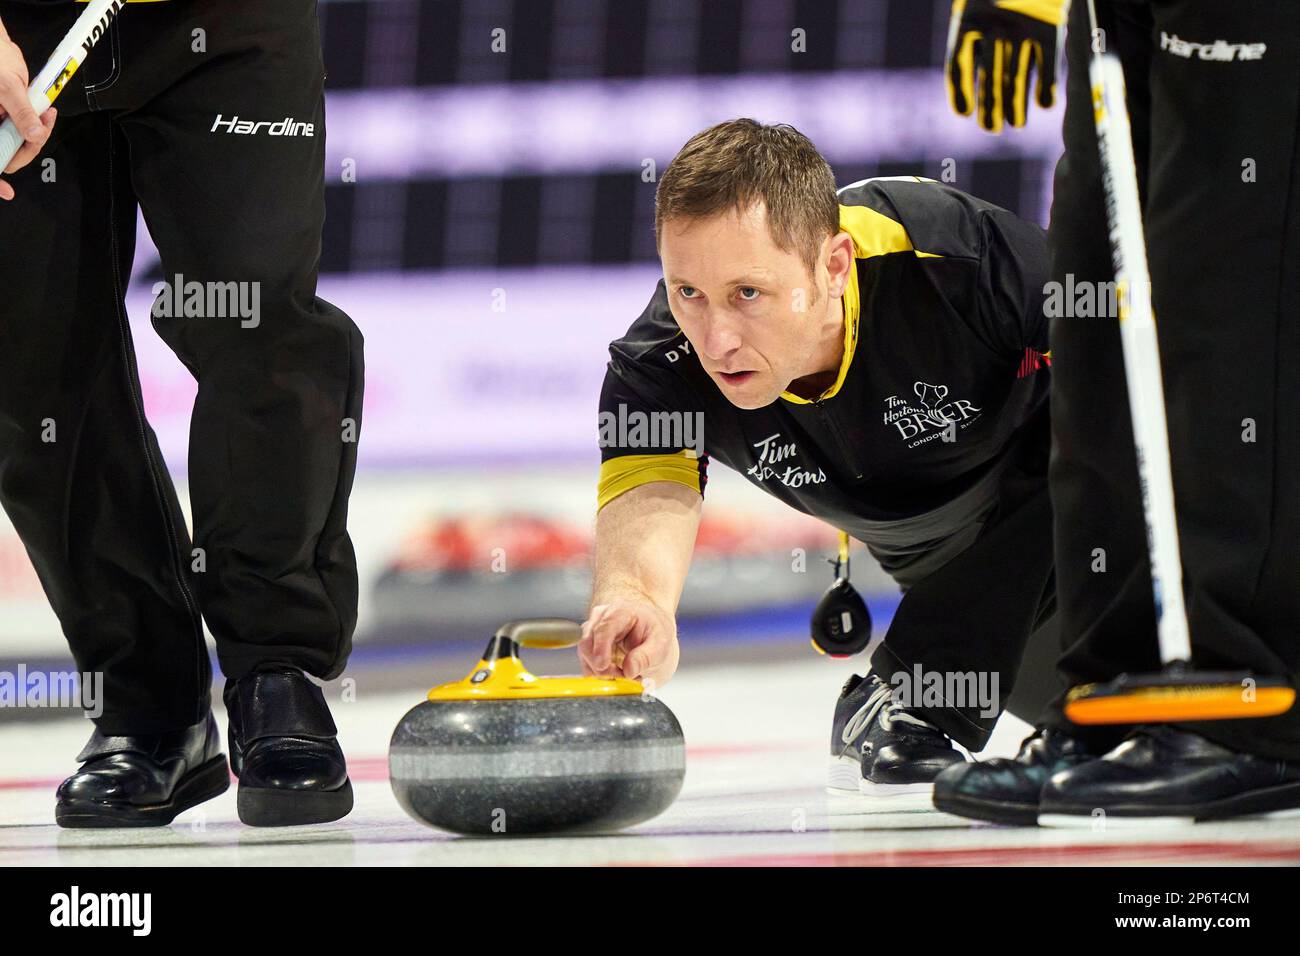 New Brunswick Second Brian King delivers a shot during his match against British Columbia at the Tim Hortons Brier curling event Tuesday, March 7, 2023, in London, Ontario